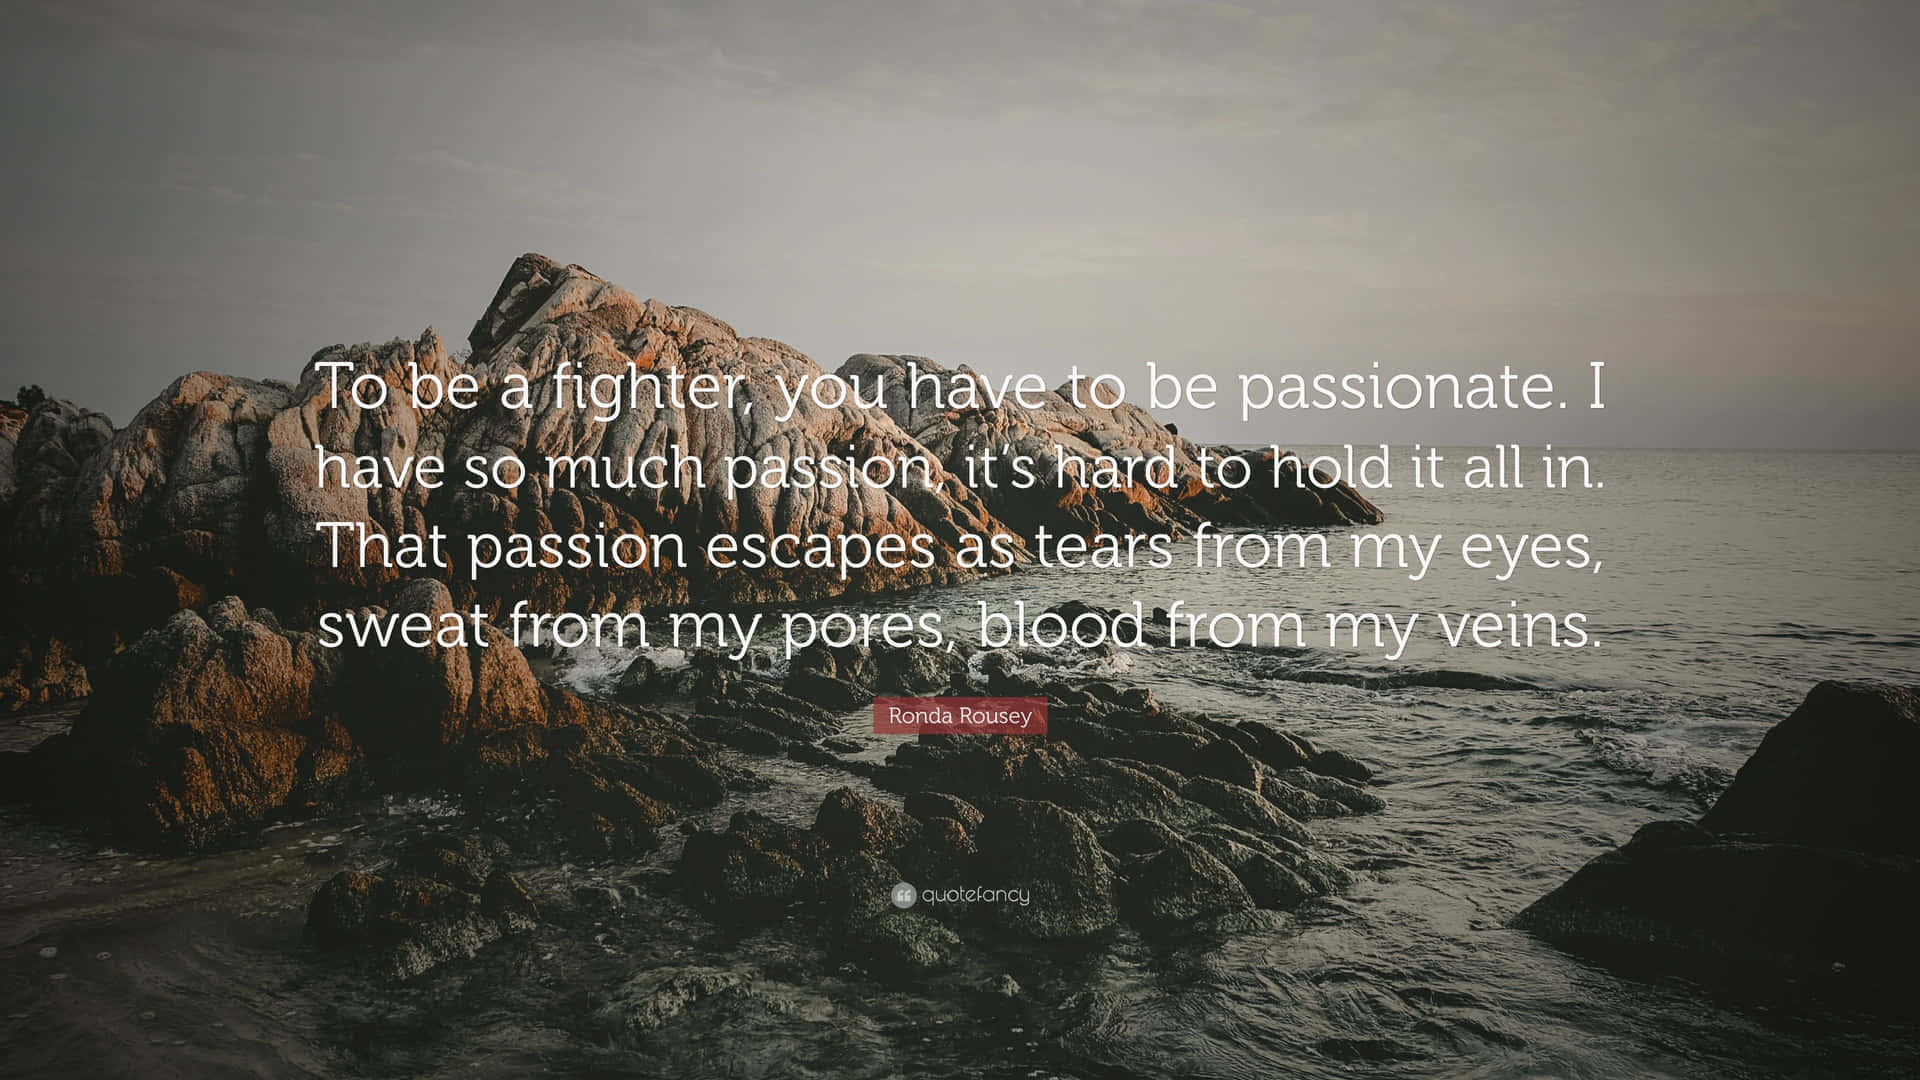 Quote Graphics About Being A Fighter And Passionate Wallpaper